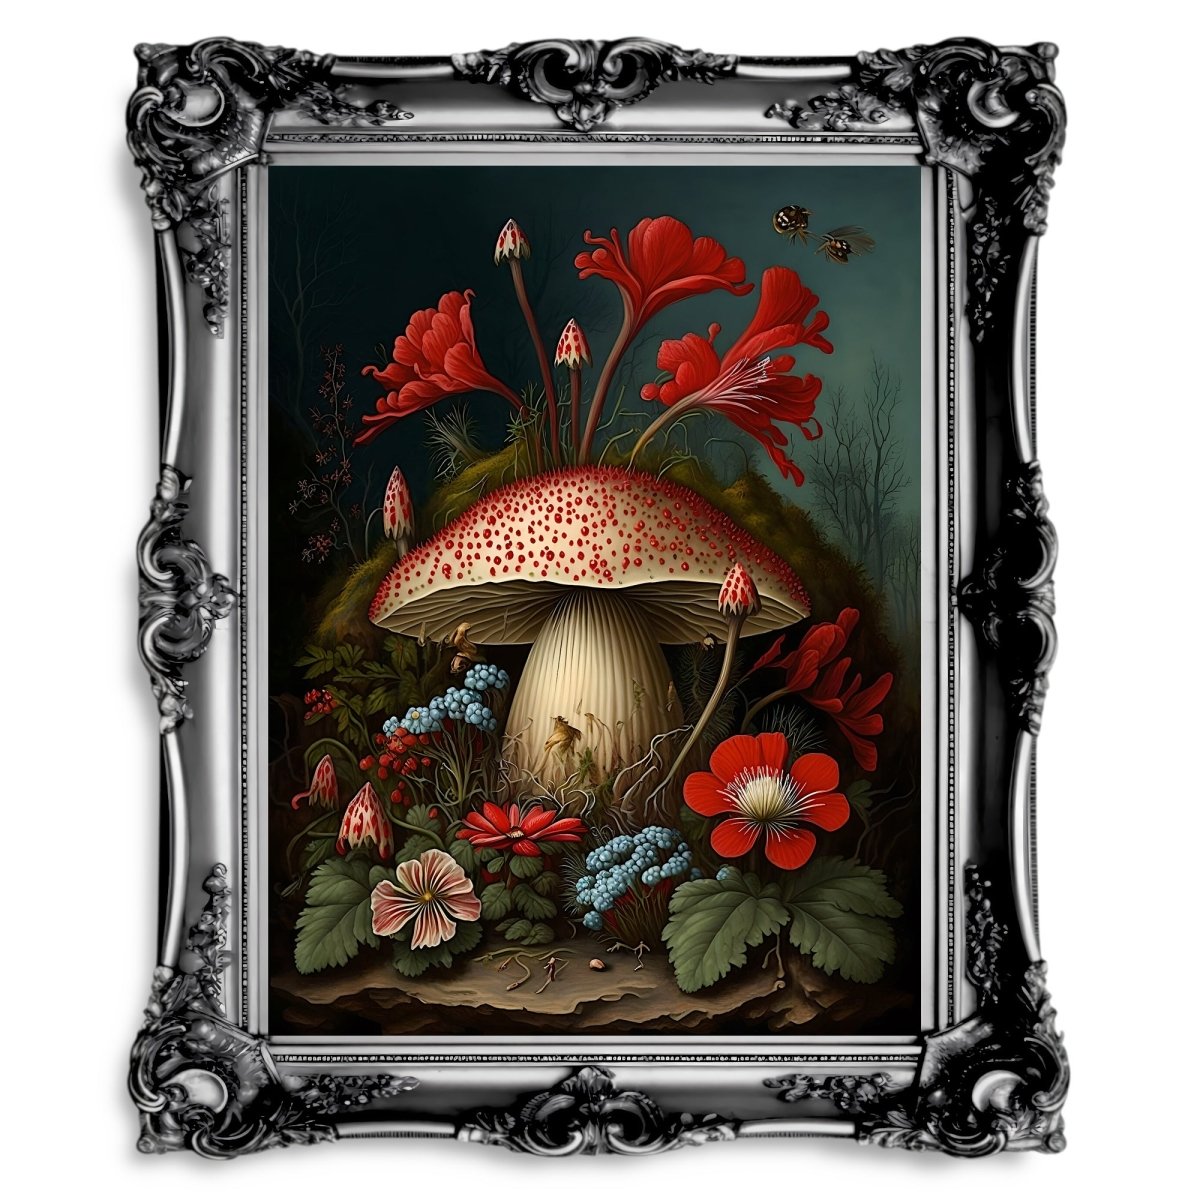 Mushrooms and Flowers in Alice Woodland Dark Academia Goblincore Poster - Everything Pixel